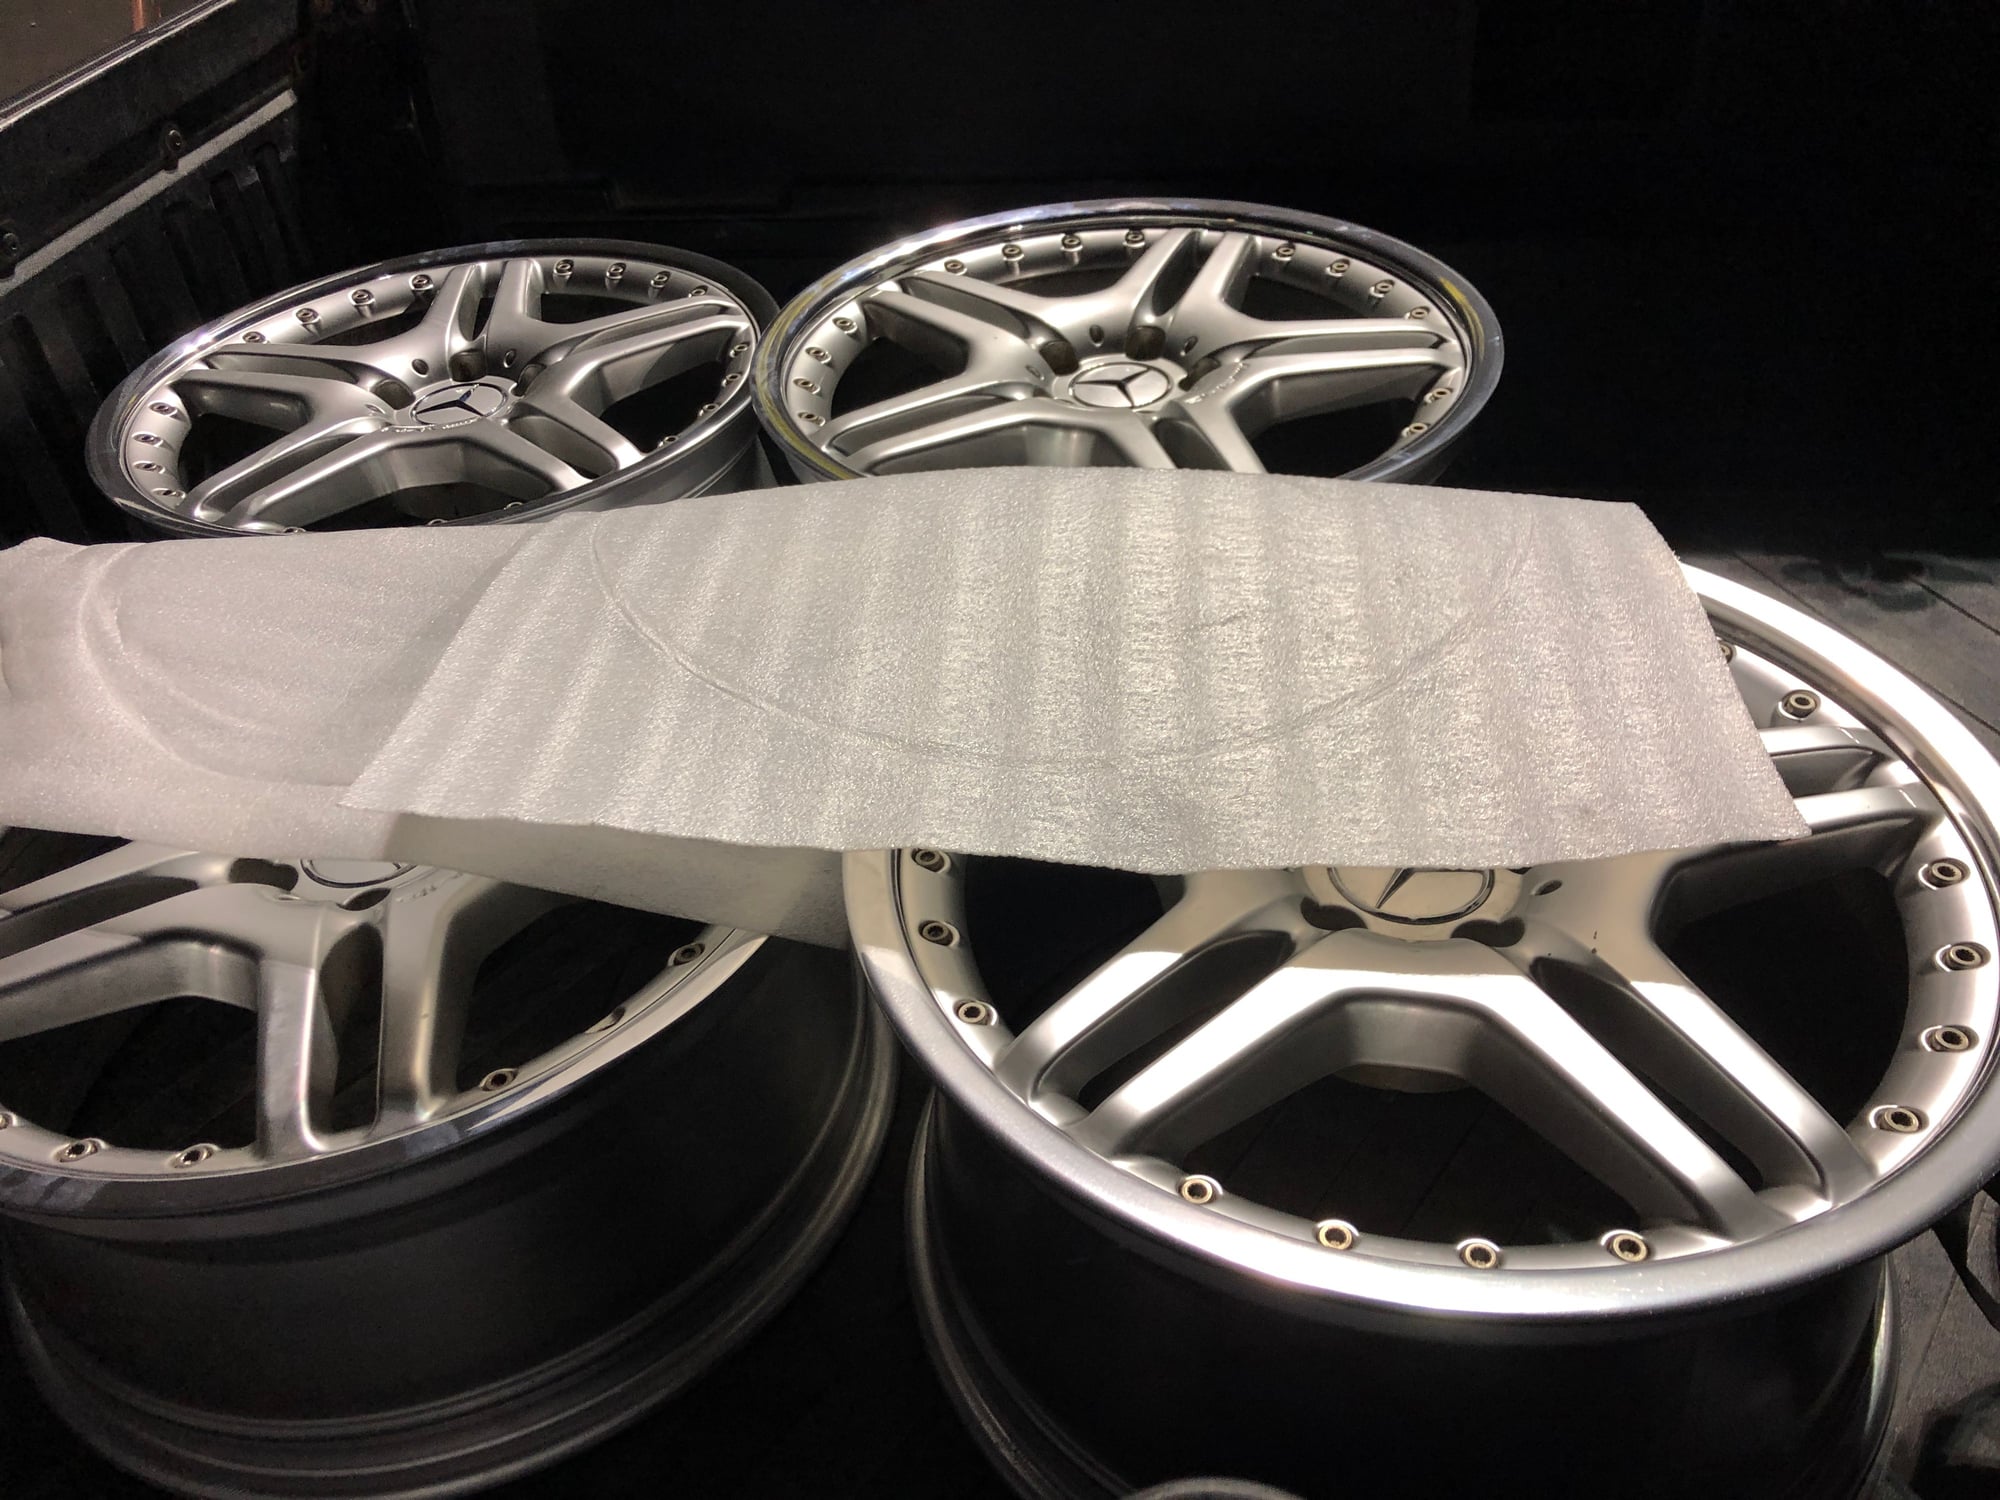 Wheels and Tires/Axles - VERY RARE CLS63 2 piece wheels for sale - Used - Huntington Beach, CA 90742, United States